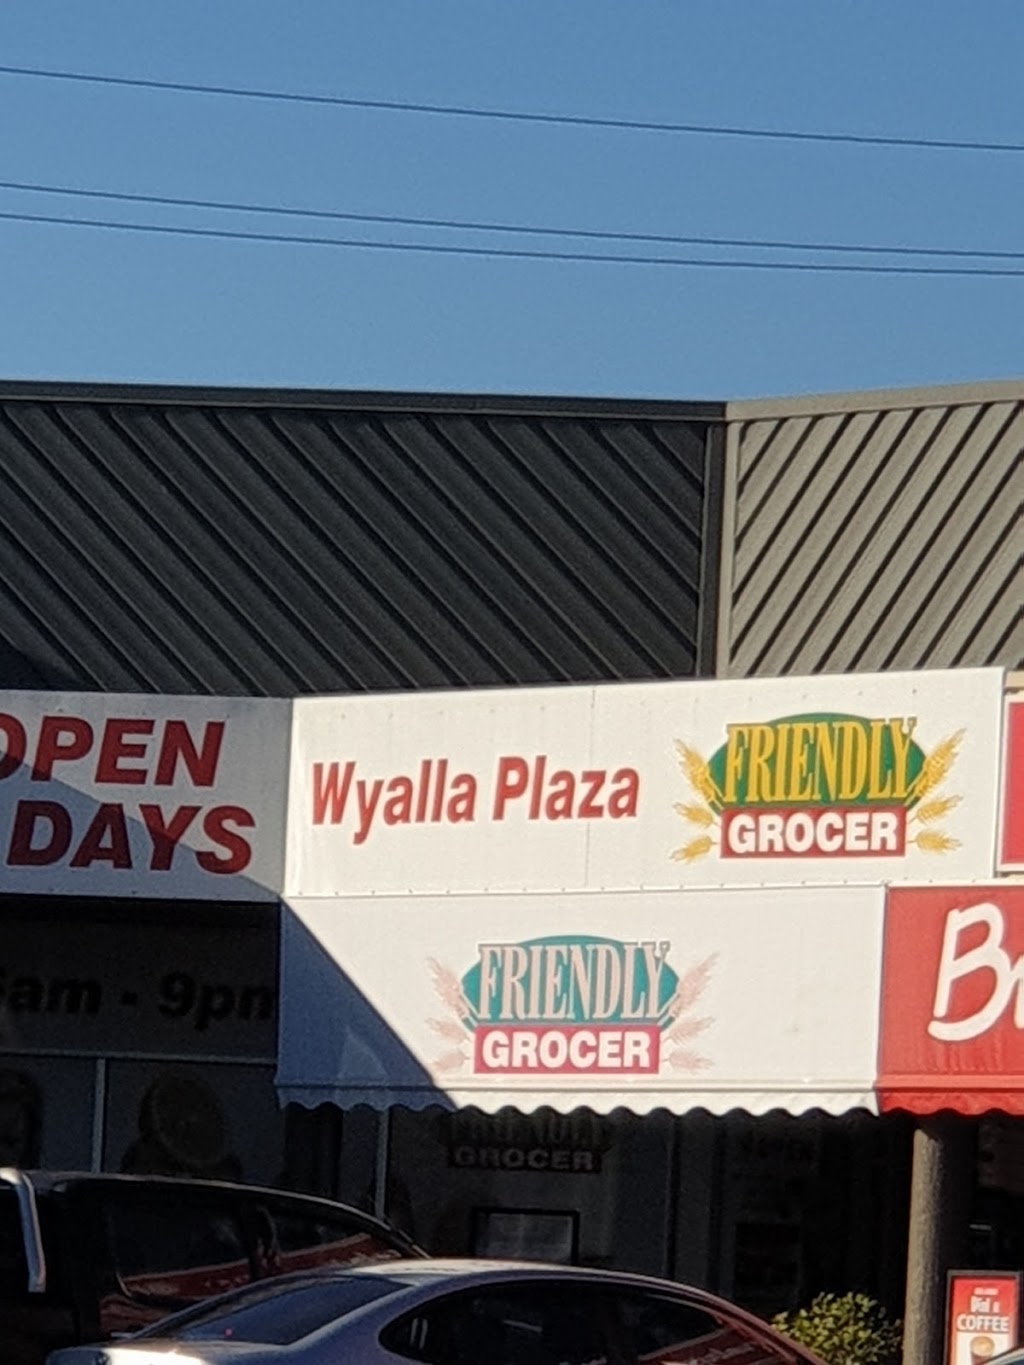 Friendly Grocer Wyalla Plaza | store | 1/238 Taylor St, Toowoomba City QLD 4350, Australia | 0746332997 OR +61 7 4633 2997